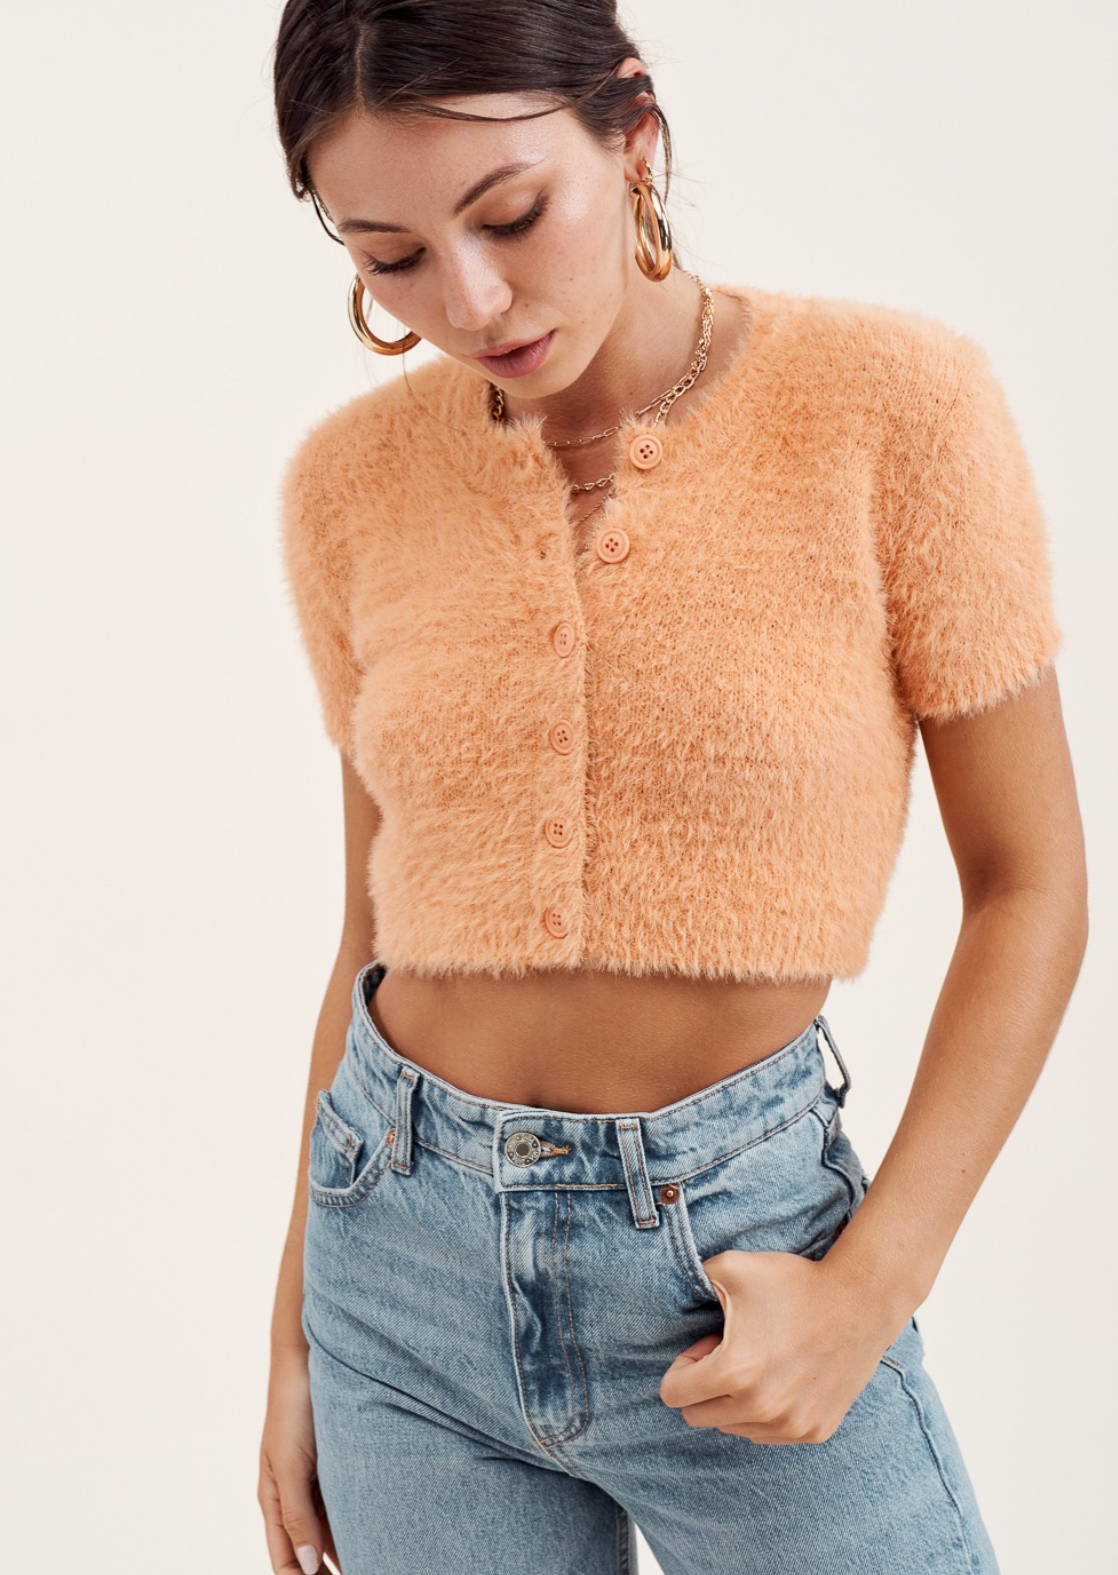 Soft fluffy & fuzzy knit slim fit cardigan top. Round neck with front buttons, cropped length hem.